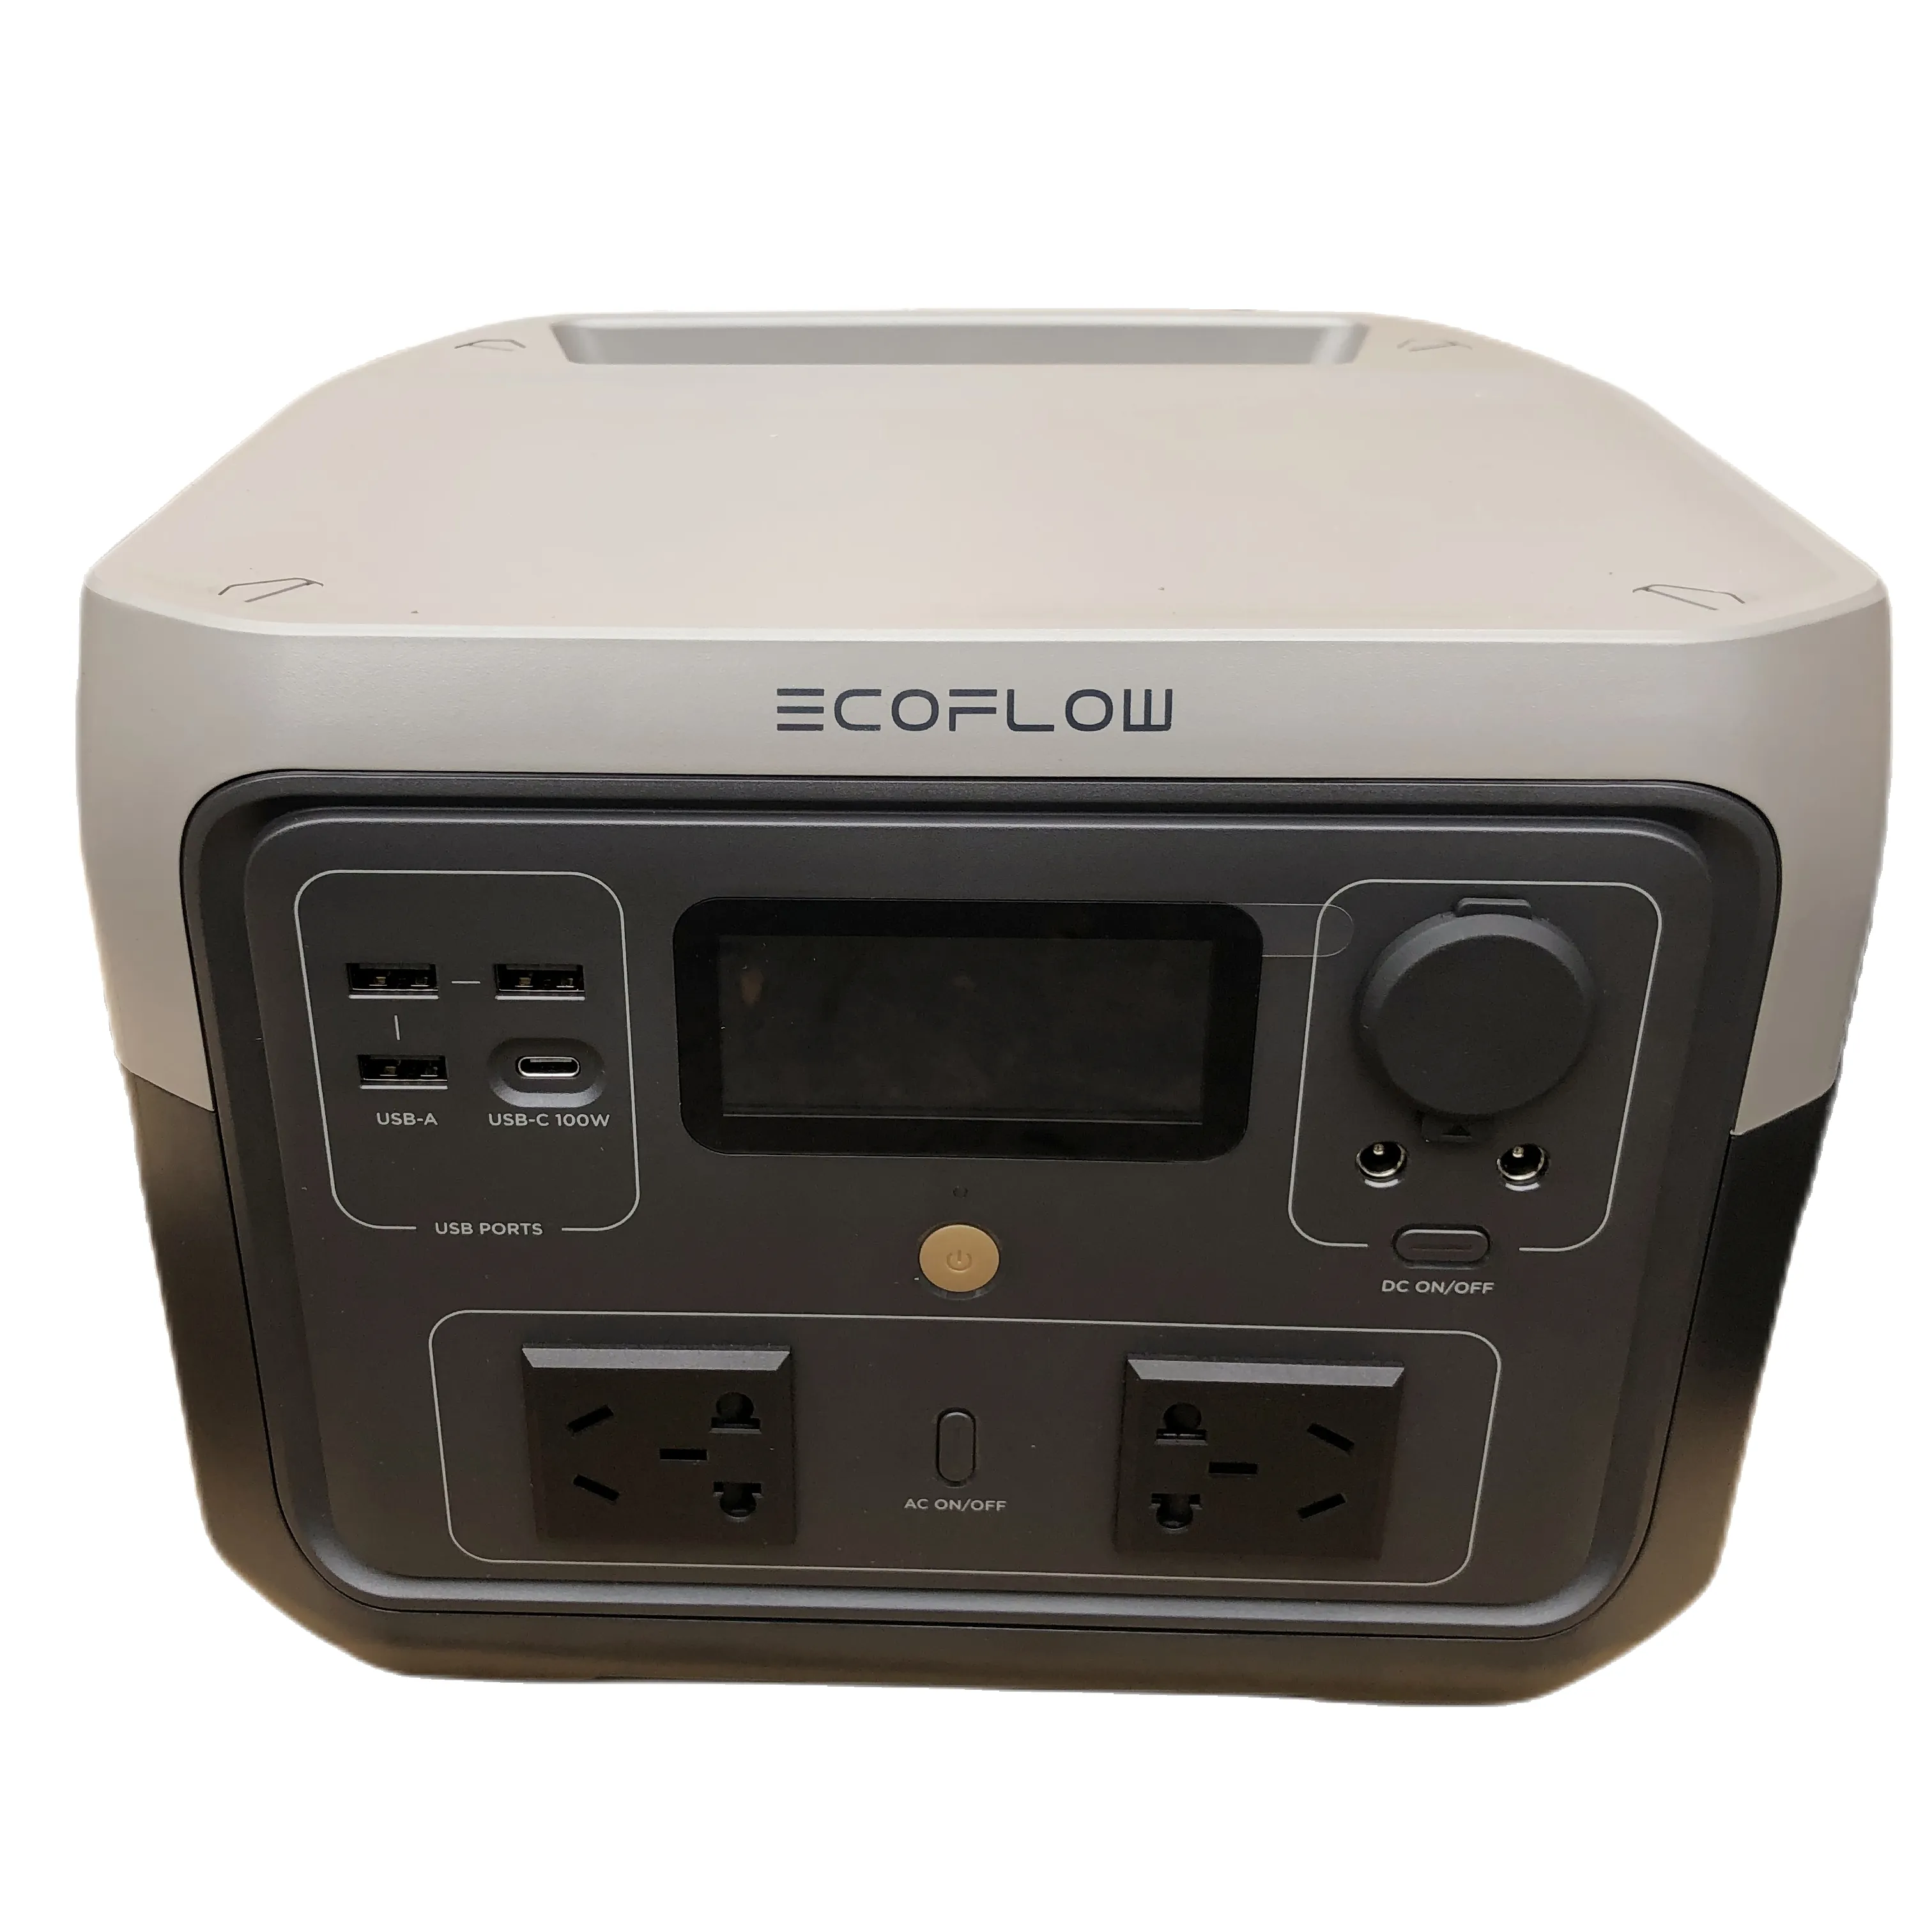 ecoflow river 2 max 512wh Portable Power Station 500W Outdoor Camping solar energy storage quick charge Lithium ion battery